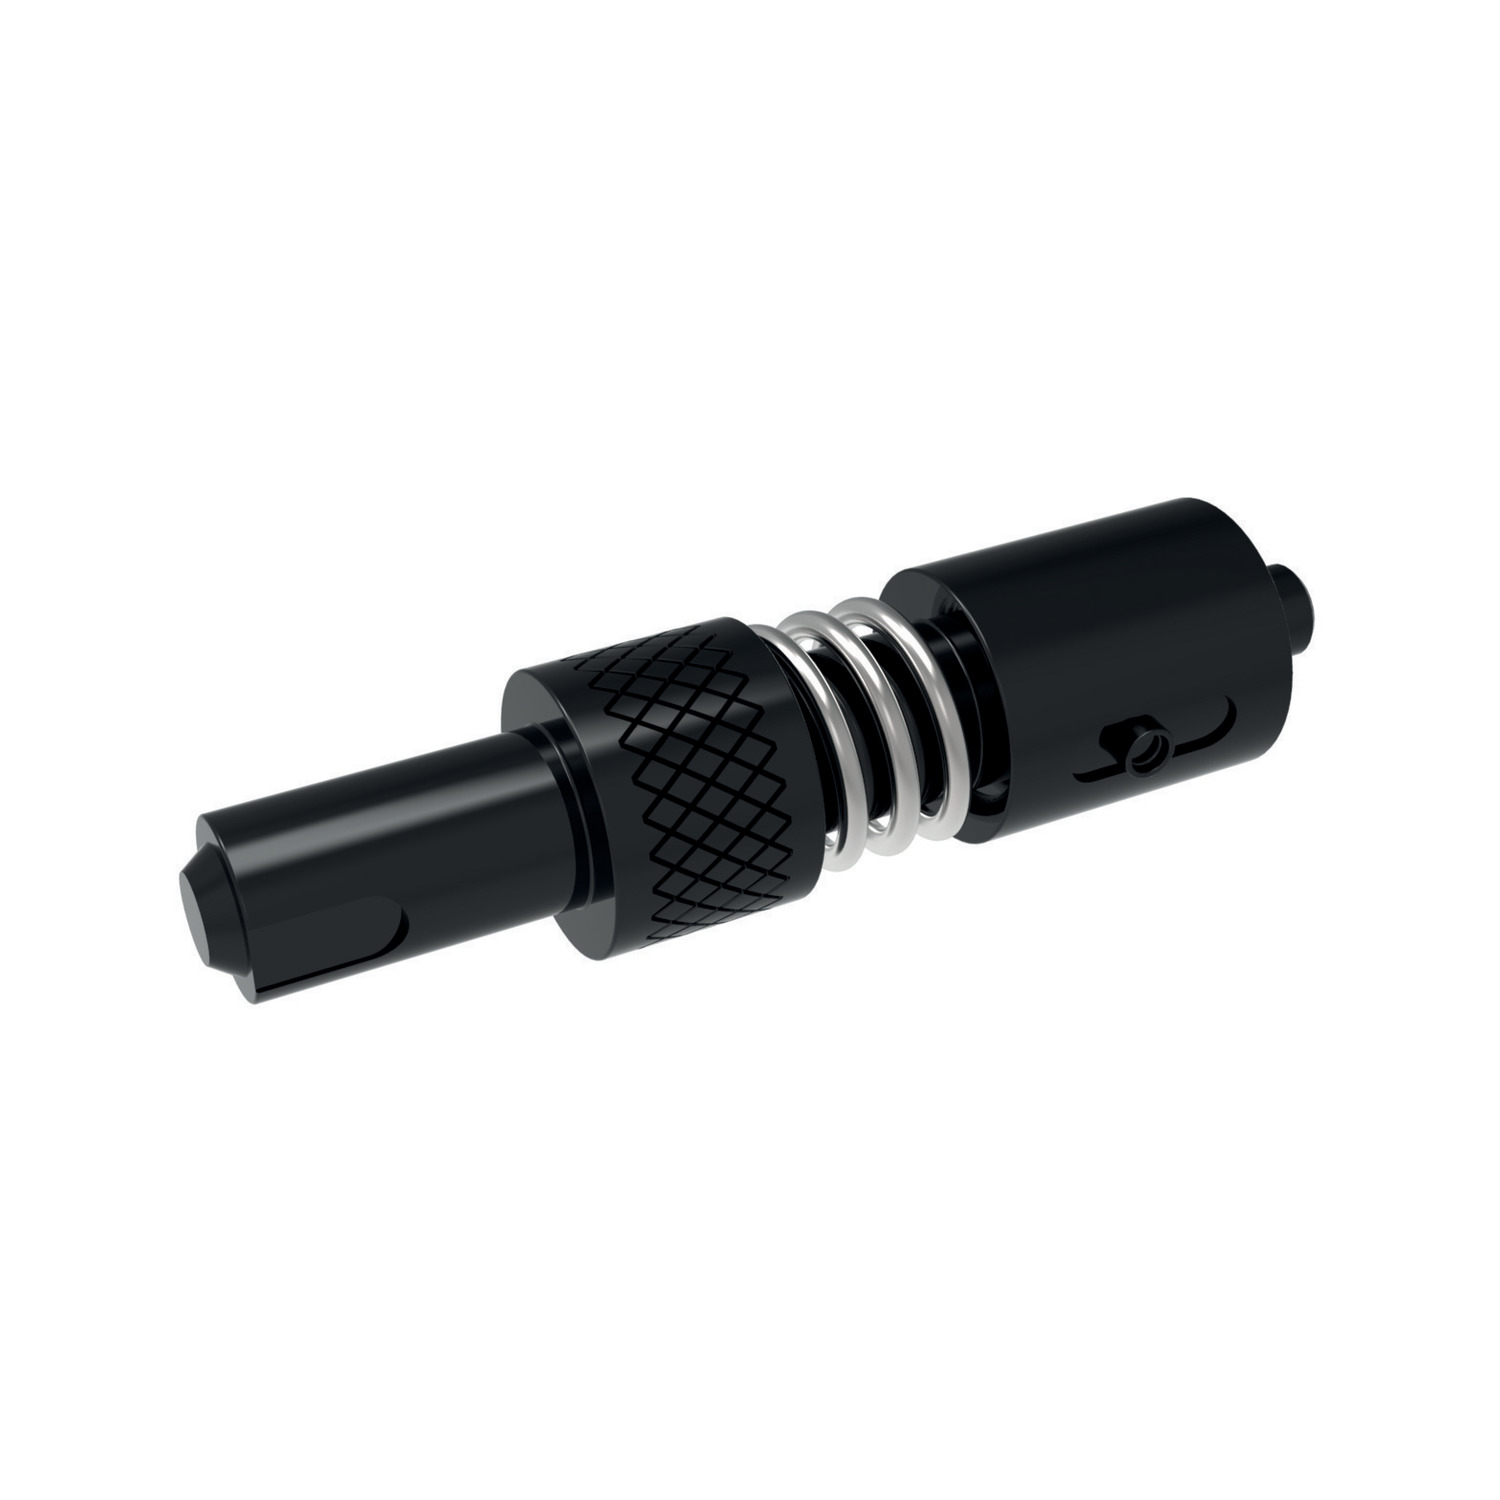 Product 22052, Installation Tool - Solid - Metric for threaded inserts 22040 & 22042 / 